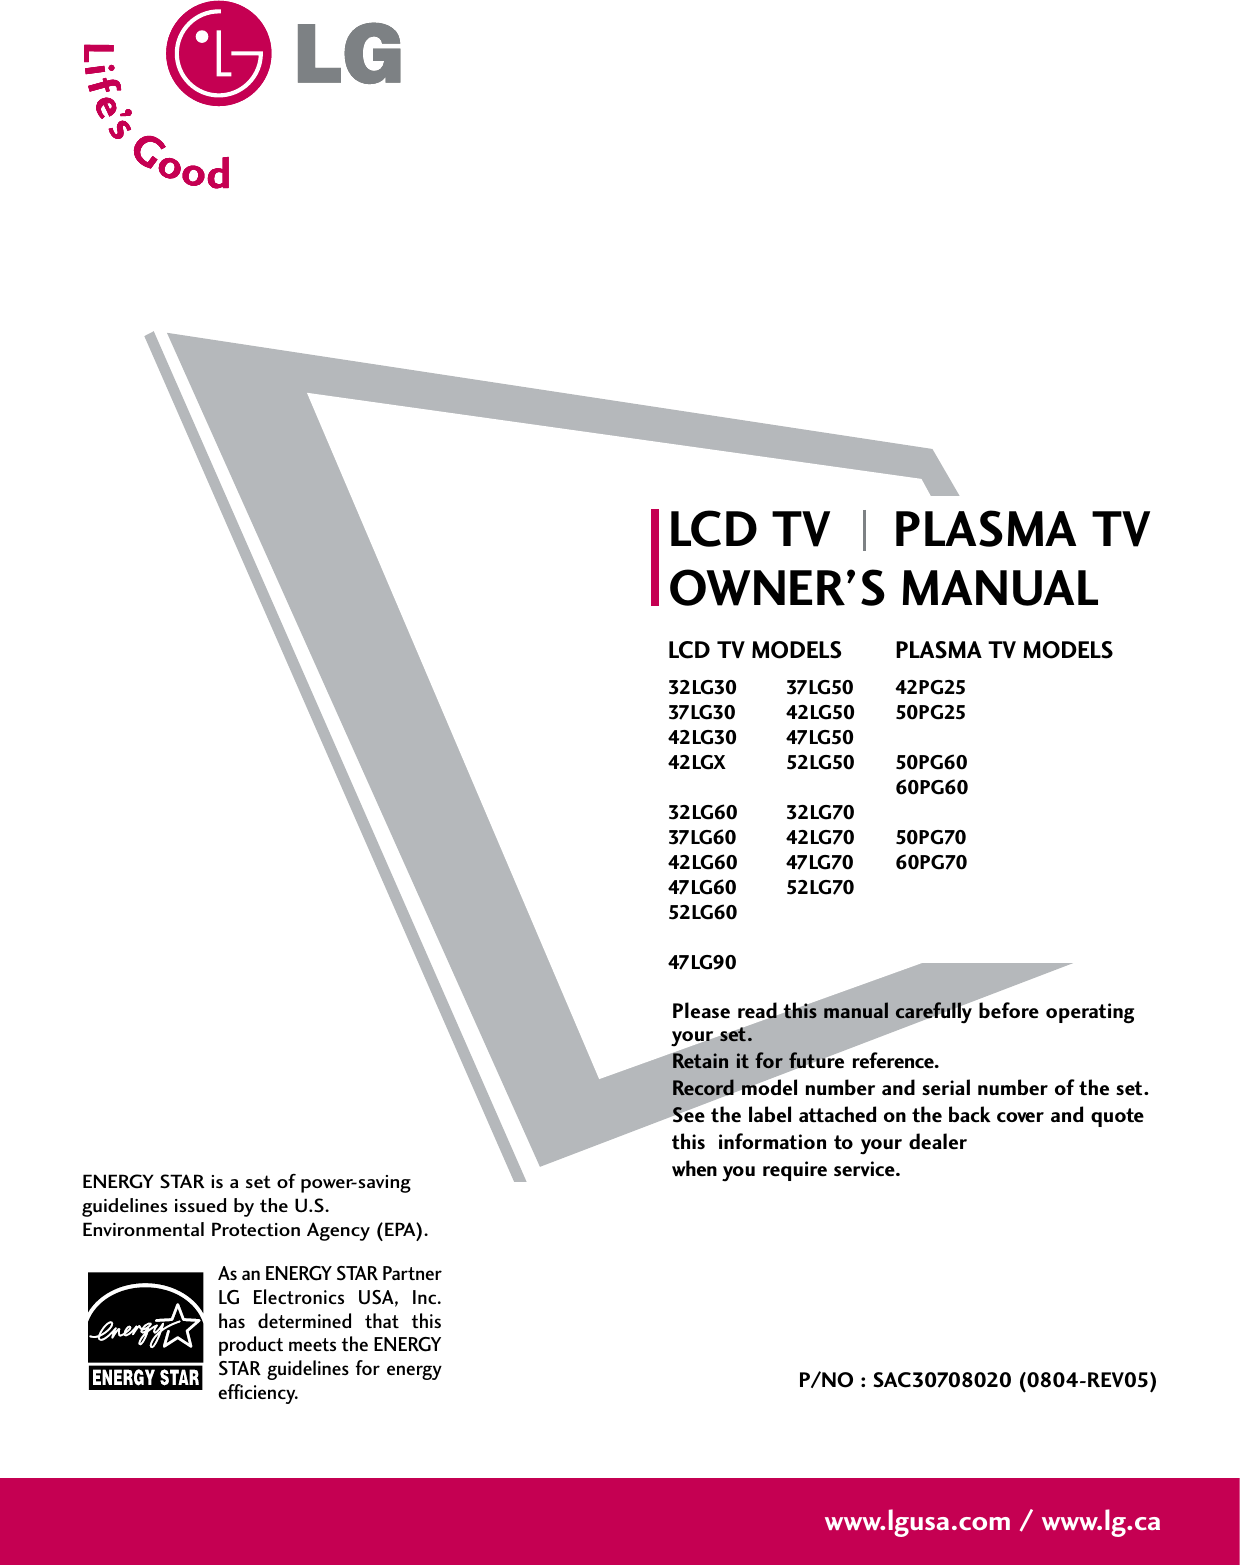 Please read this manual carefully before operatingyour set. Retain it for future reference.Record model number and serial number of the set. See the label attached on the back cover and quote this  information to your dealer when you require service.LCD TV PLASMA TVOWNER’S MANUALLCD TV MODELS32LG30 37LG5037LG30 42LG5042LG30 47LG5042LGX 52LG5032LG60 32LG7037LG60 42LG7042LG60 47LG7047LG60 52LG7052LG6047LG90PLASMA TV MODELS42PG2550PG2550PG6060PG6050PG7060PG70P/NO : SAC30708020 (0804-REV05)www.lgusa.com / www.lg.caAs an ENERGY STAR PartnerLG  Electronics  USA,  Inc.has  determined  that  thisproduct meets the ENERGYSTAR guidelines for energyefficiency.ENERGY STAR is a set of power-savingguidelines issued by the U.S.Environmental Protection Agency (EPA).